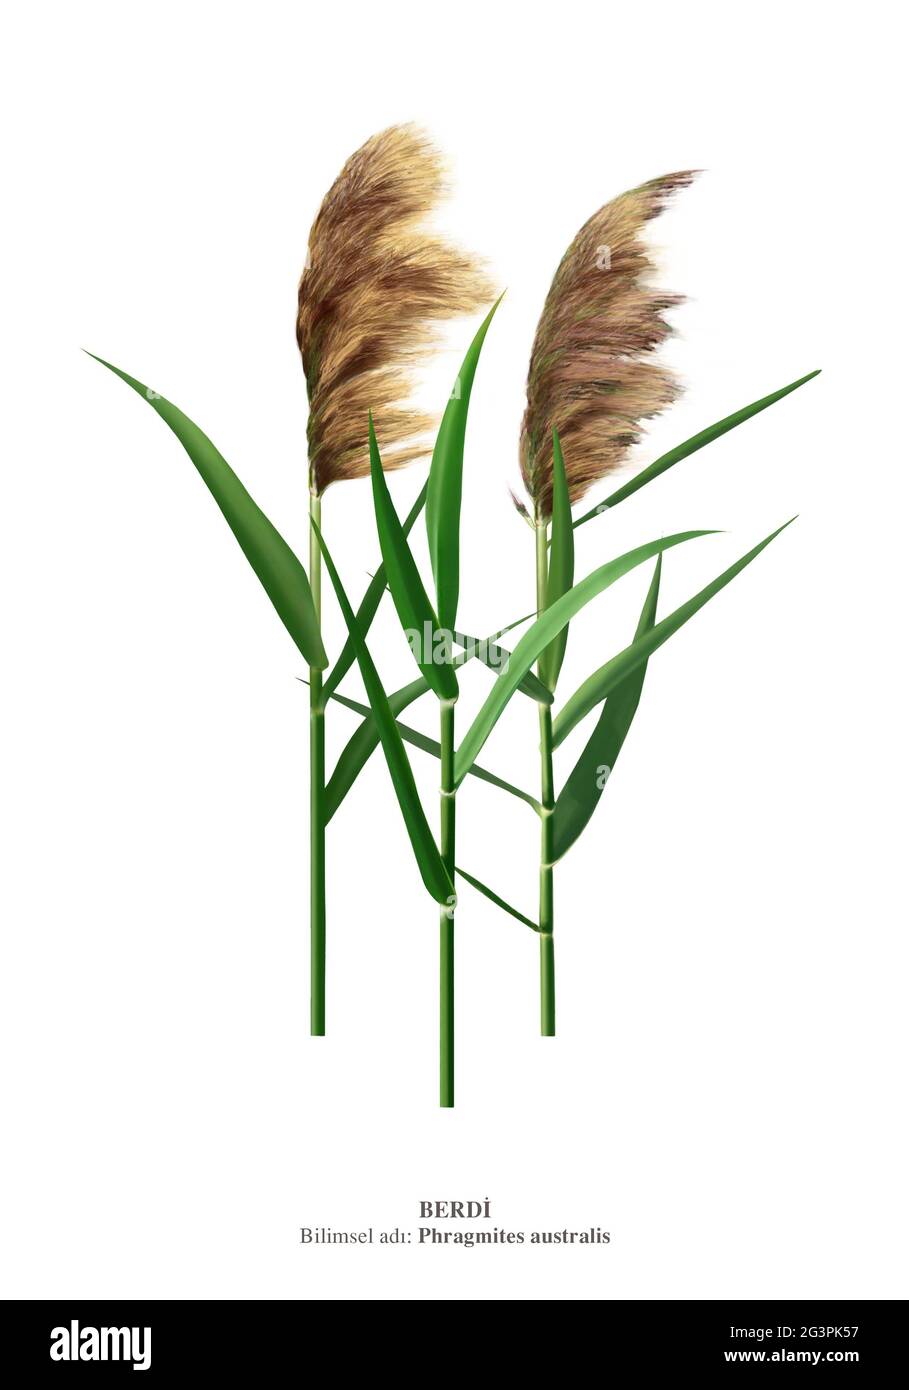 Phragmites australis, known as common reed, is a broadly distributed wetland grass growing nearly 20 ft (6 m) tall Stock Photo